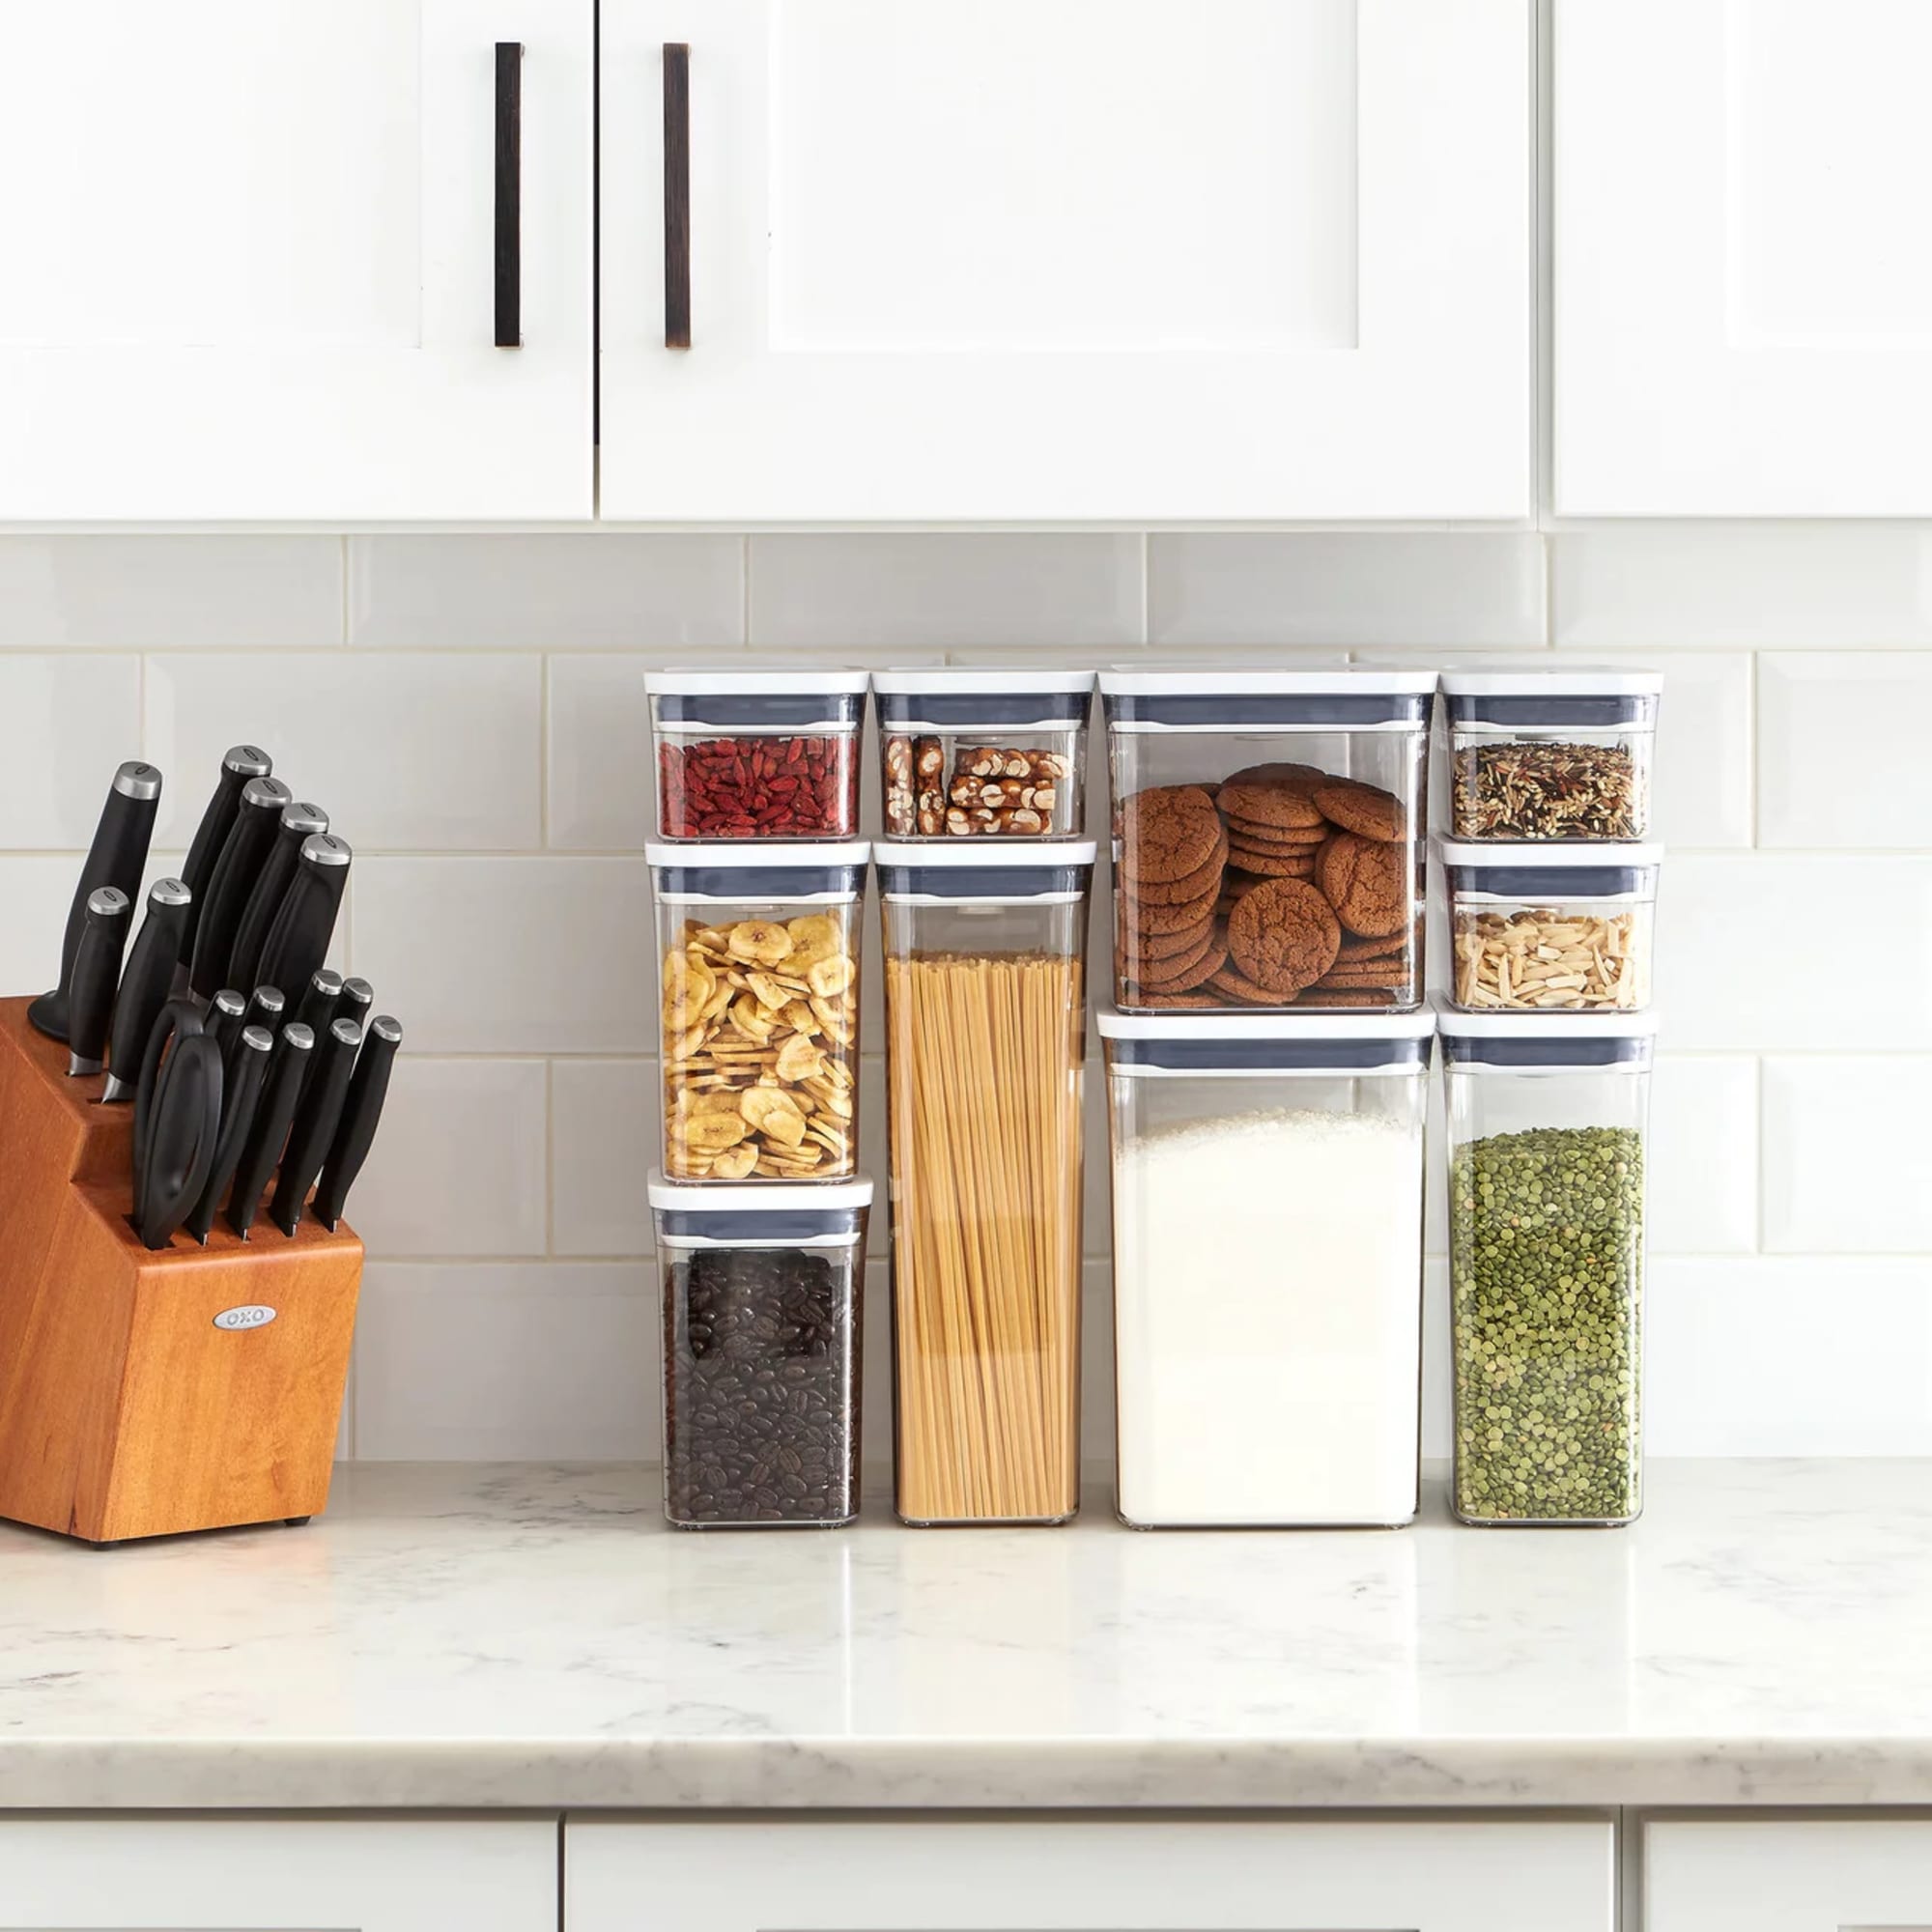 https://res.cloudinary.com/kitchenwarehouse/image/upload/t_PDP_2000x2000/Campaign%20Images/Kitchenware-Storage-Solutions-and-Organisation-Pantry-Storage-Containers.jpg